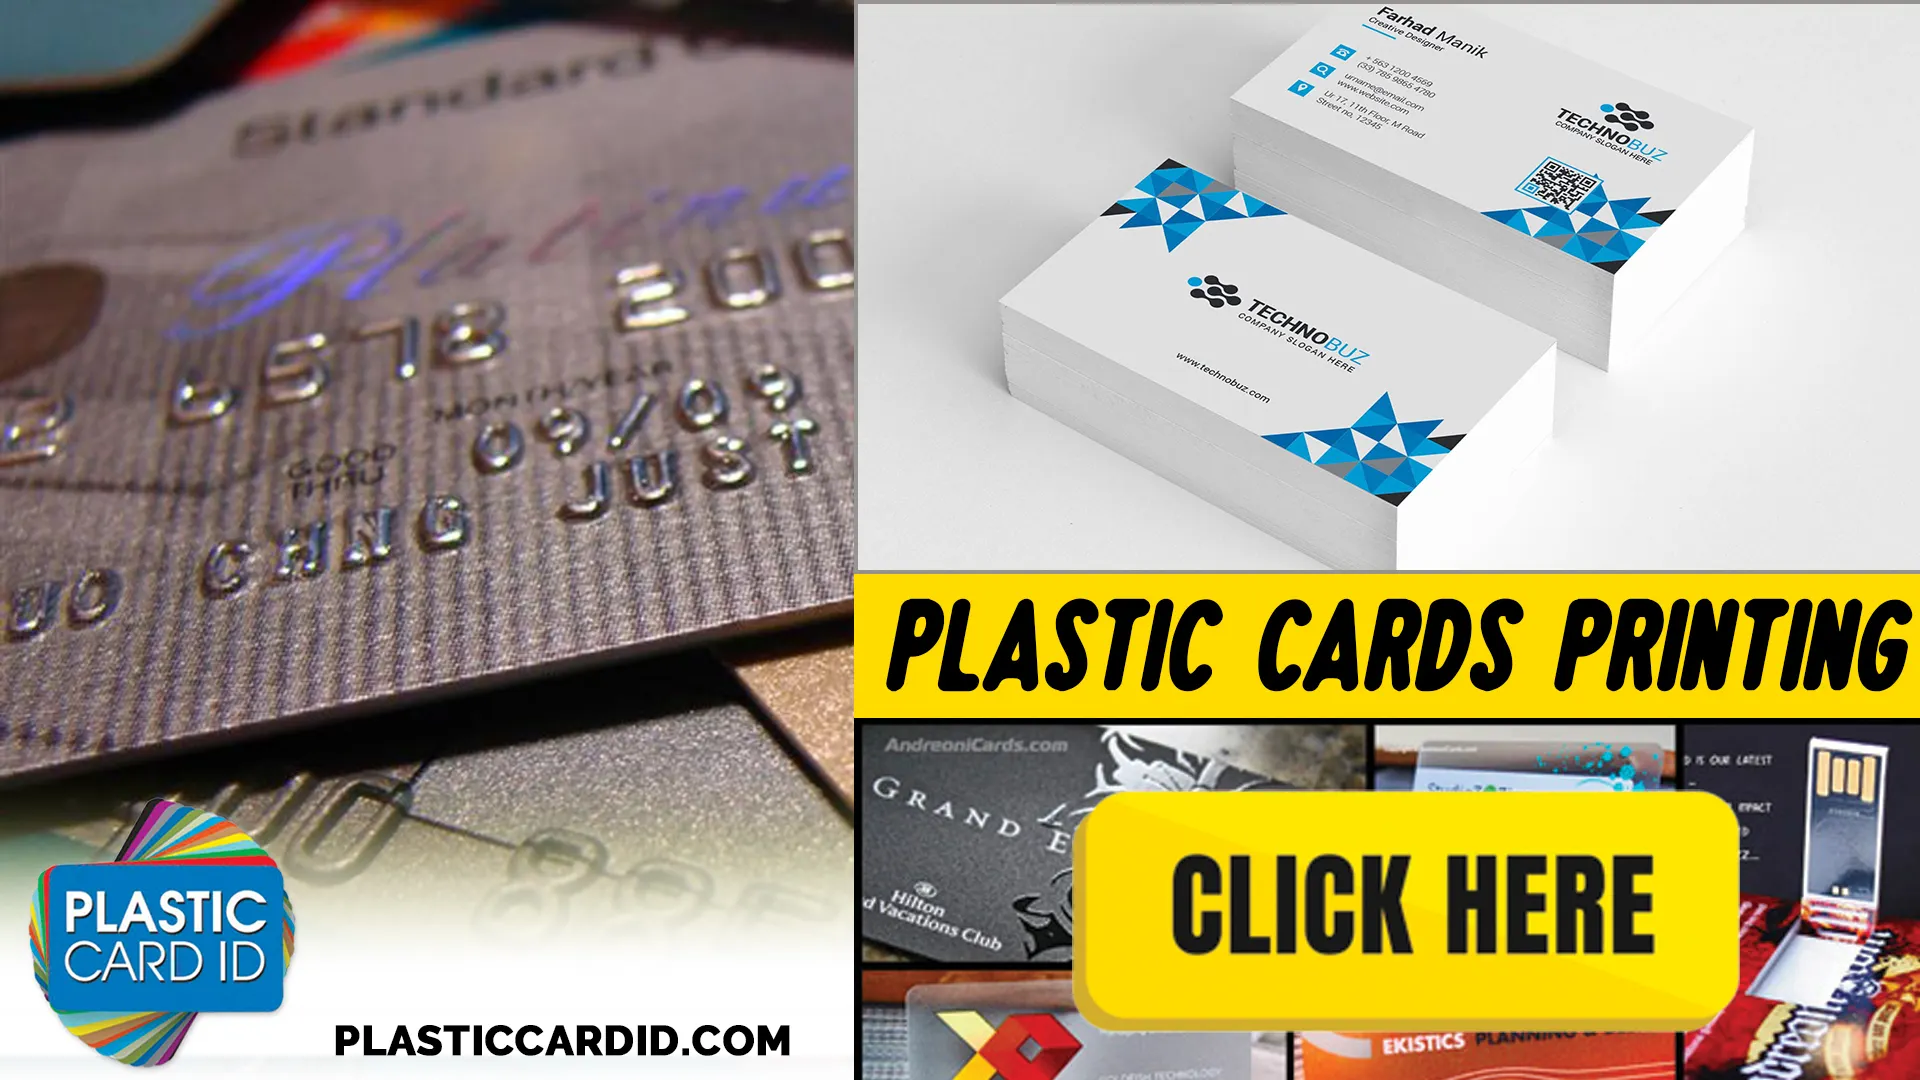 Design Considerations for Plastic and Paper Cards